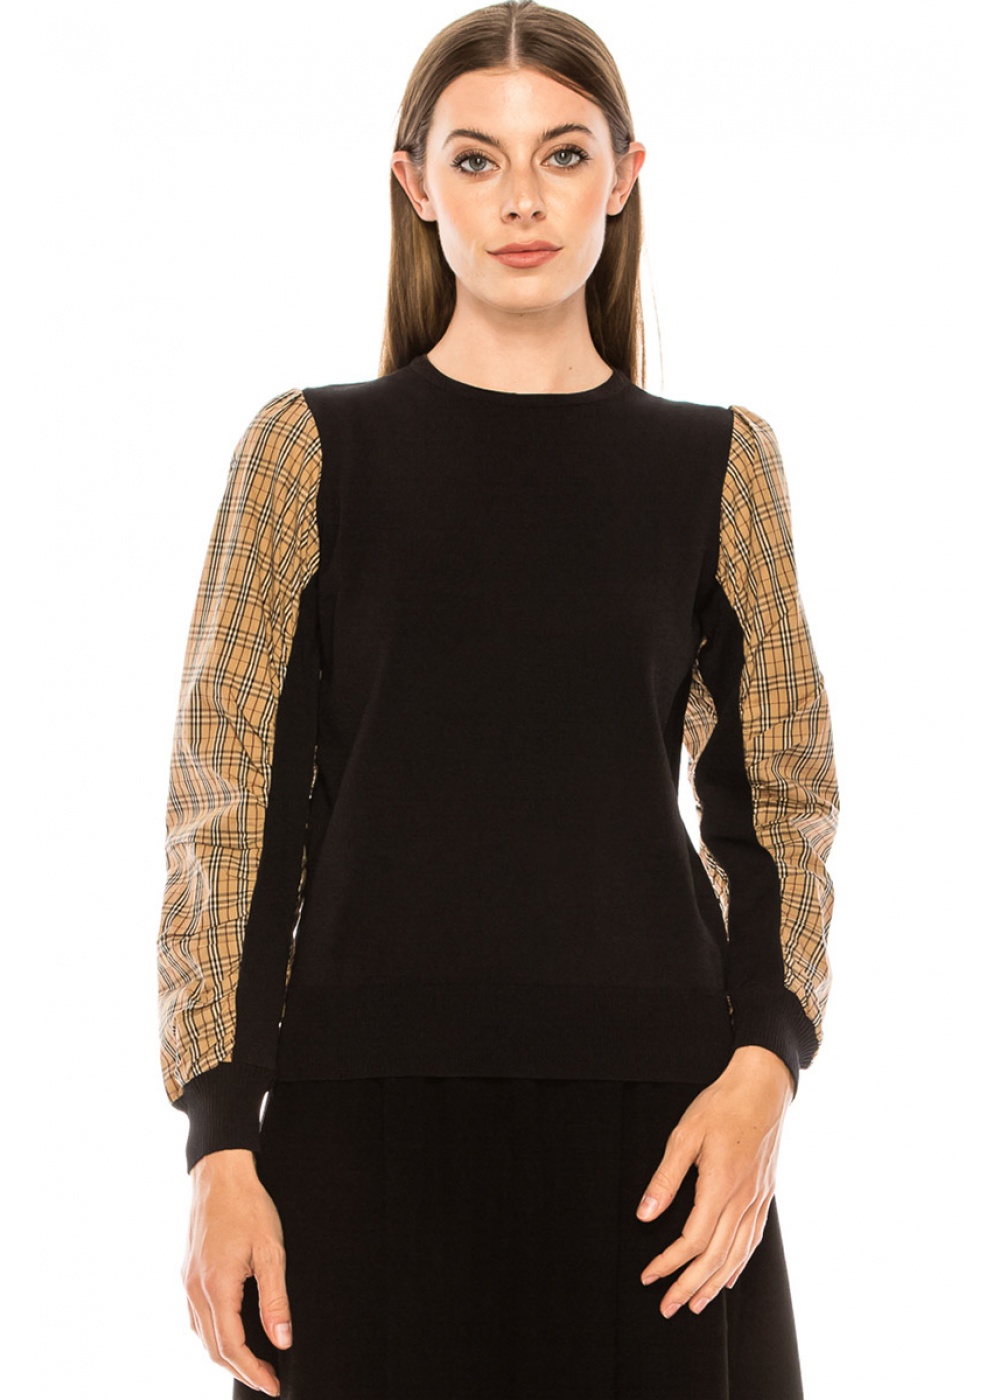 Black sweater with checkered sleeves